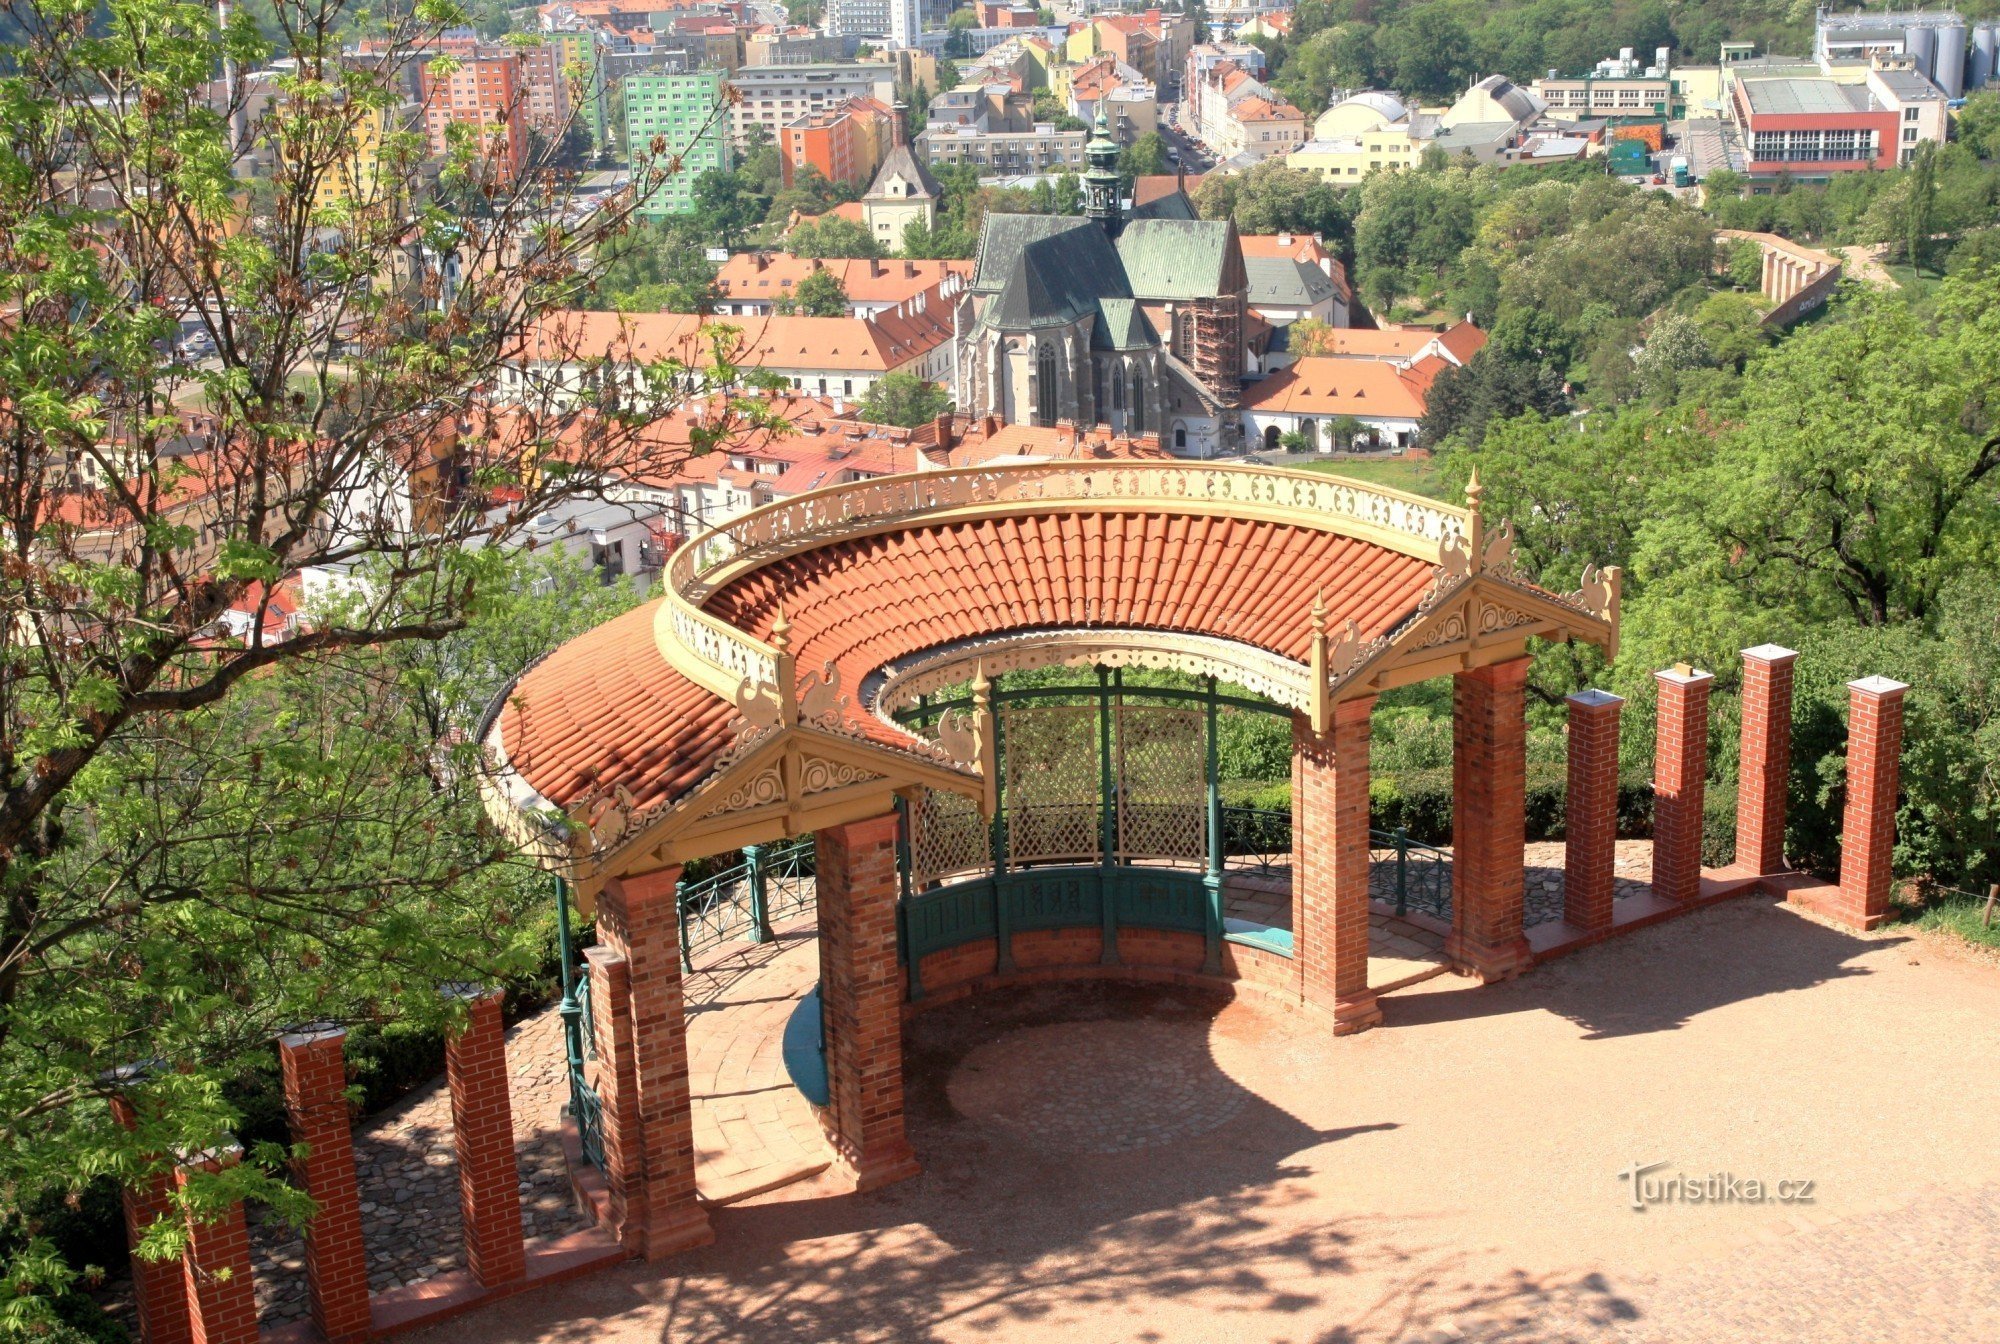 View of the gazebo from the upper bastion